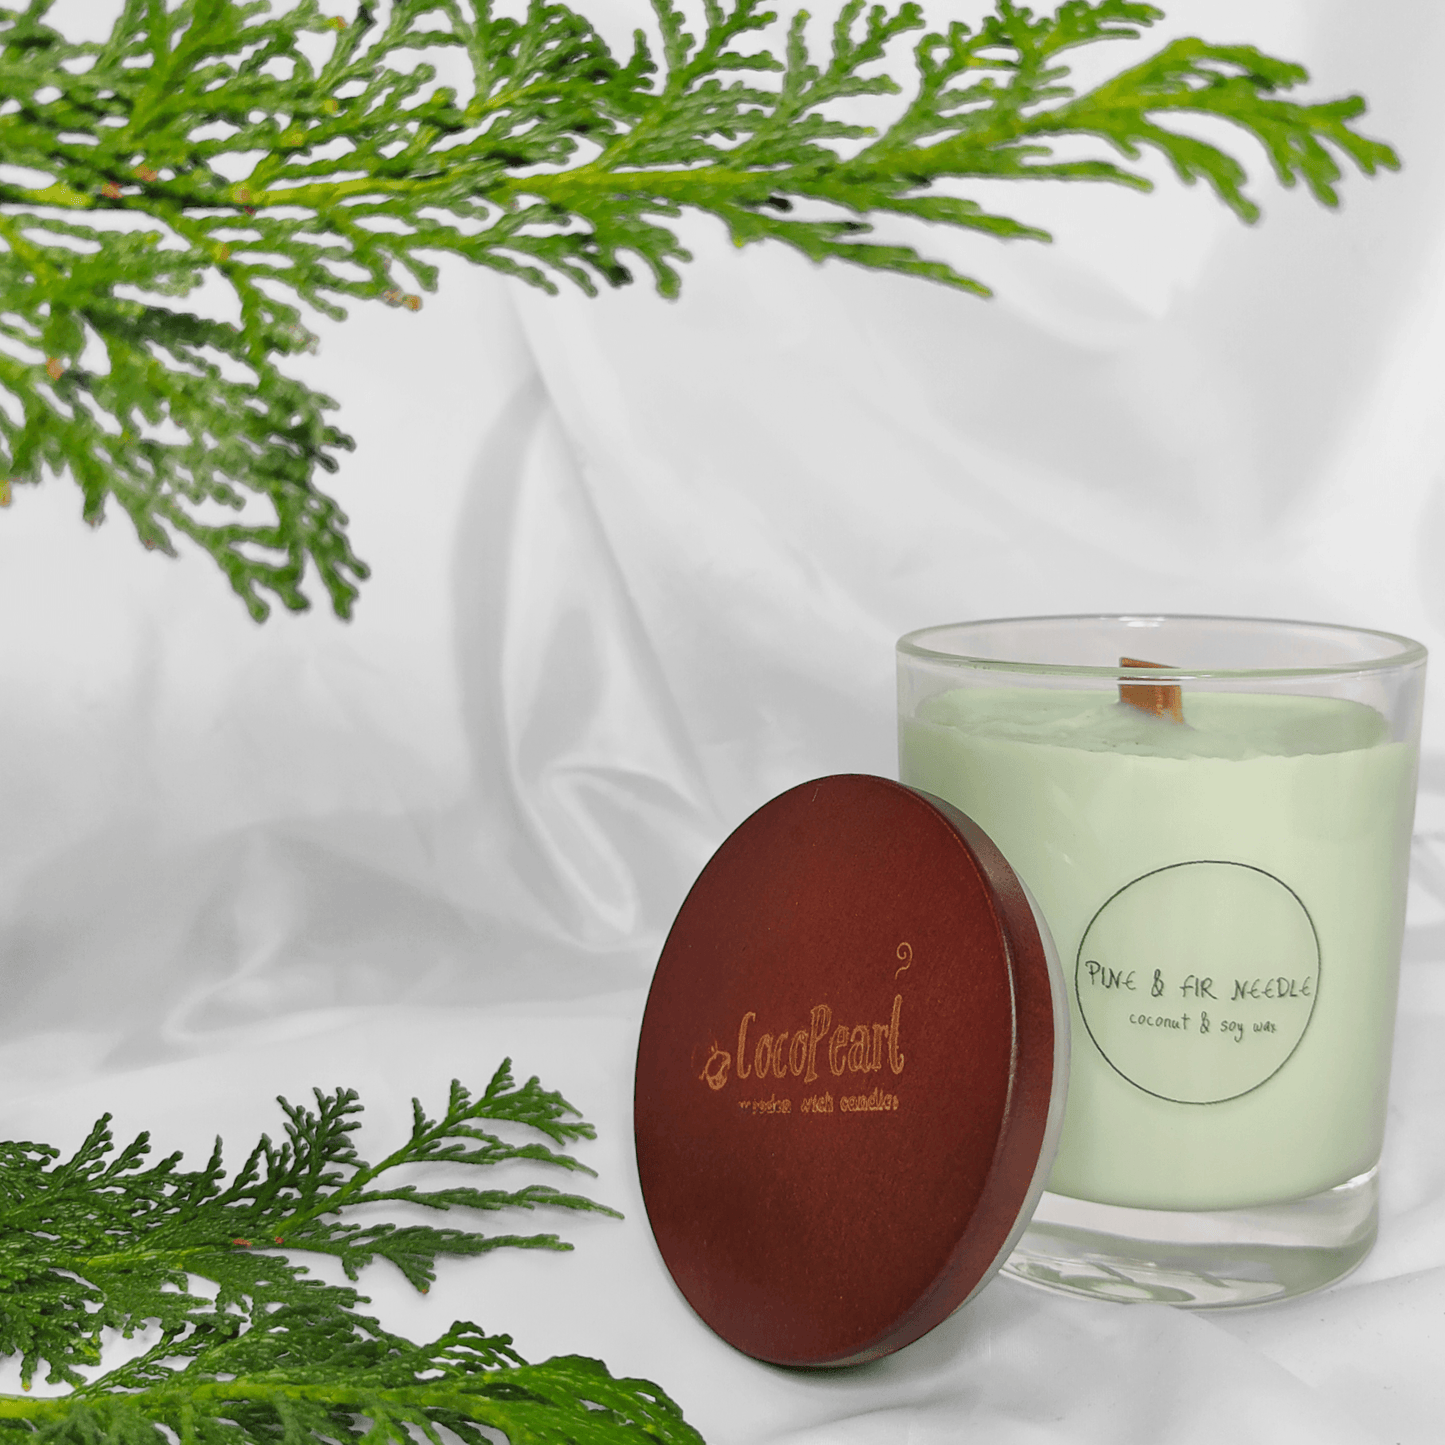 Pine & fir needle | Scented Candle for Home Decor - CocoPearl Candles